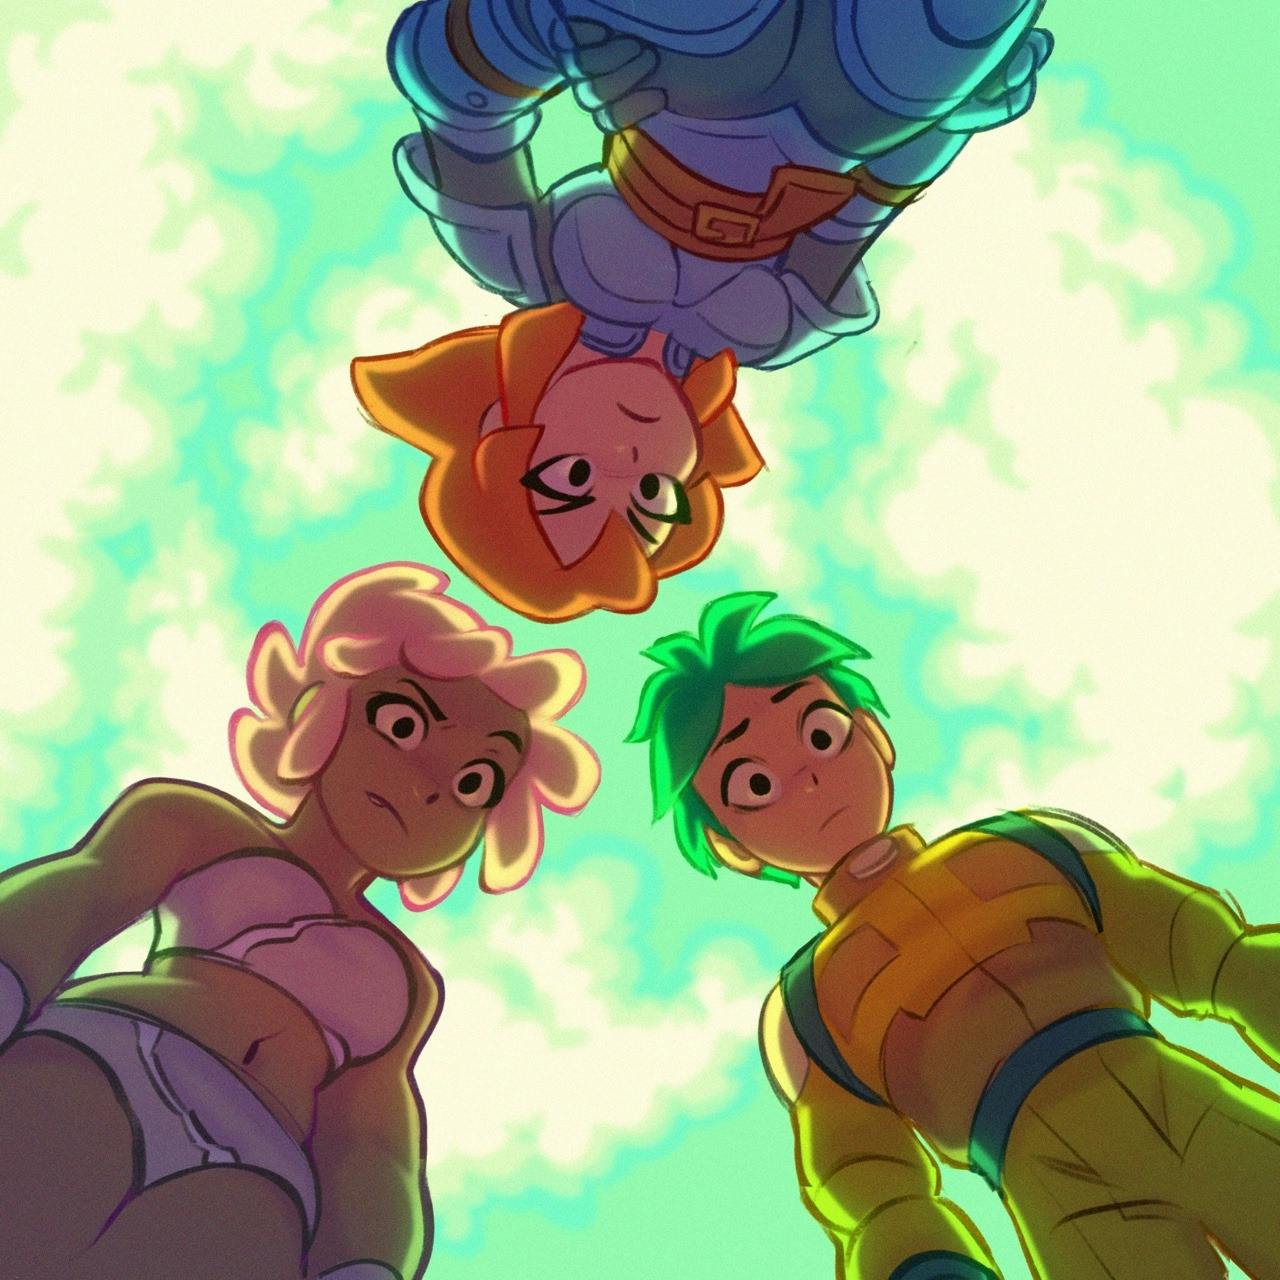 An illustration of three characters looking down at the picture plane.